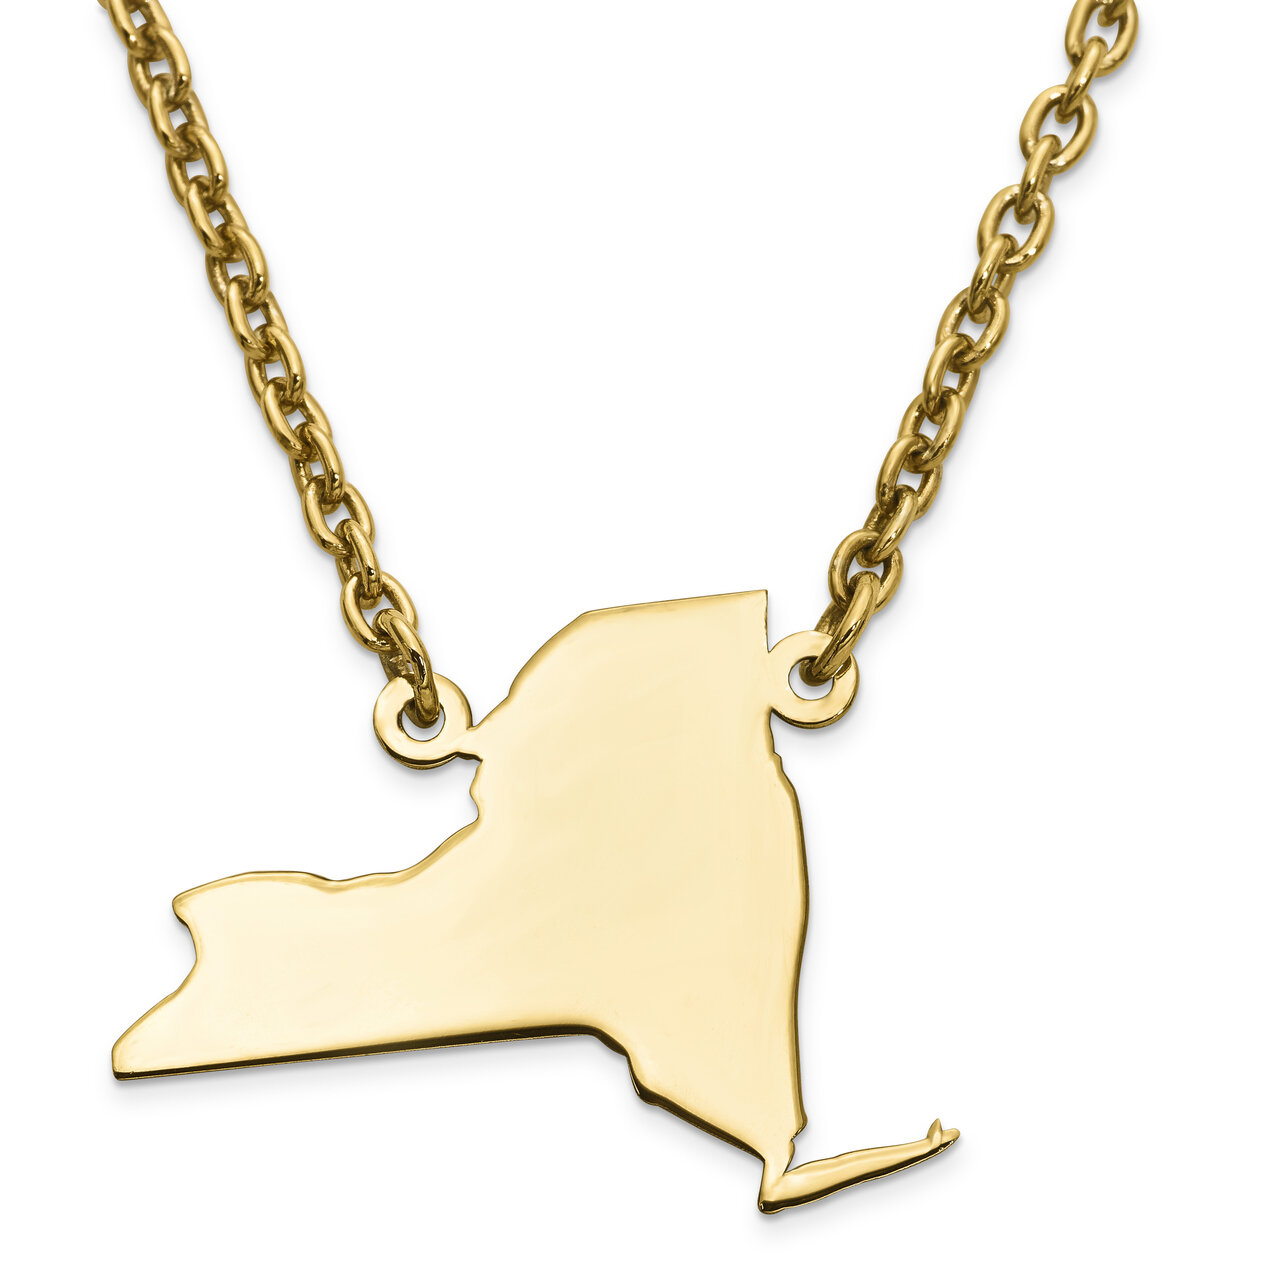 New York State Pendant Necklace with Chain 14k Yellow Gold Engravable XNA706Y-NY